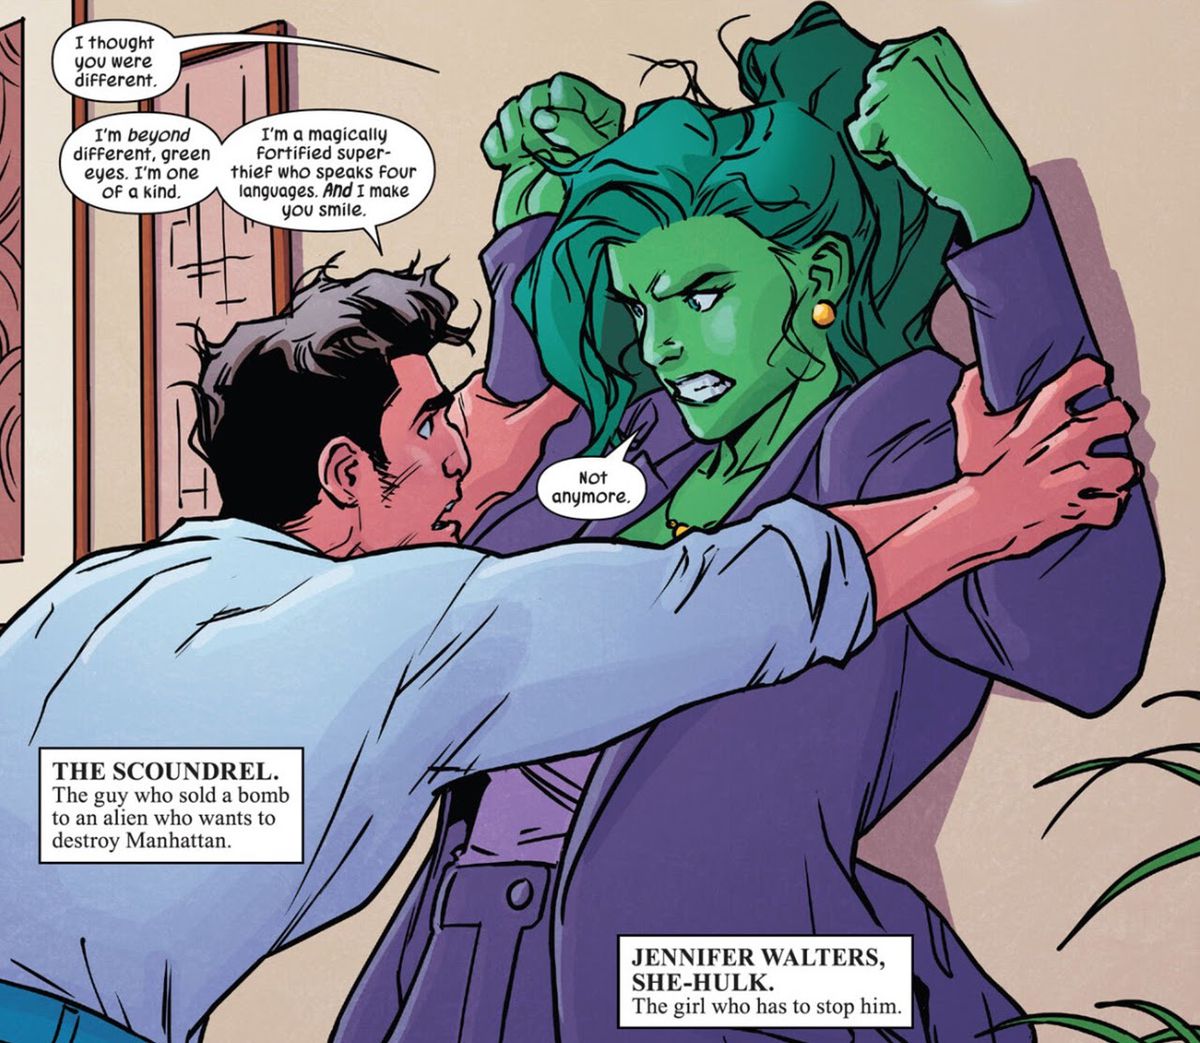 The Scoundrel (the guy who sold a bomb to an alien who wants to destroy Manhattan) holds an angry She-Hulk’s arms back against the wall. “I thought you were different,” She-Hulk growls. “I’m beyond different,” he protests, “I’m a magically fortified super-thief who speaks four languages. And I make you smile.” “Not anymore,” She-Hulk says in She-Hulk #15 (2023). 